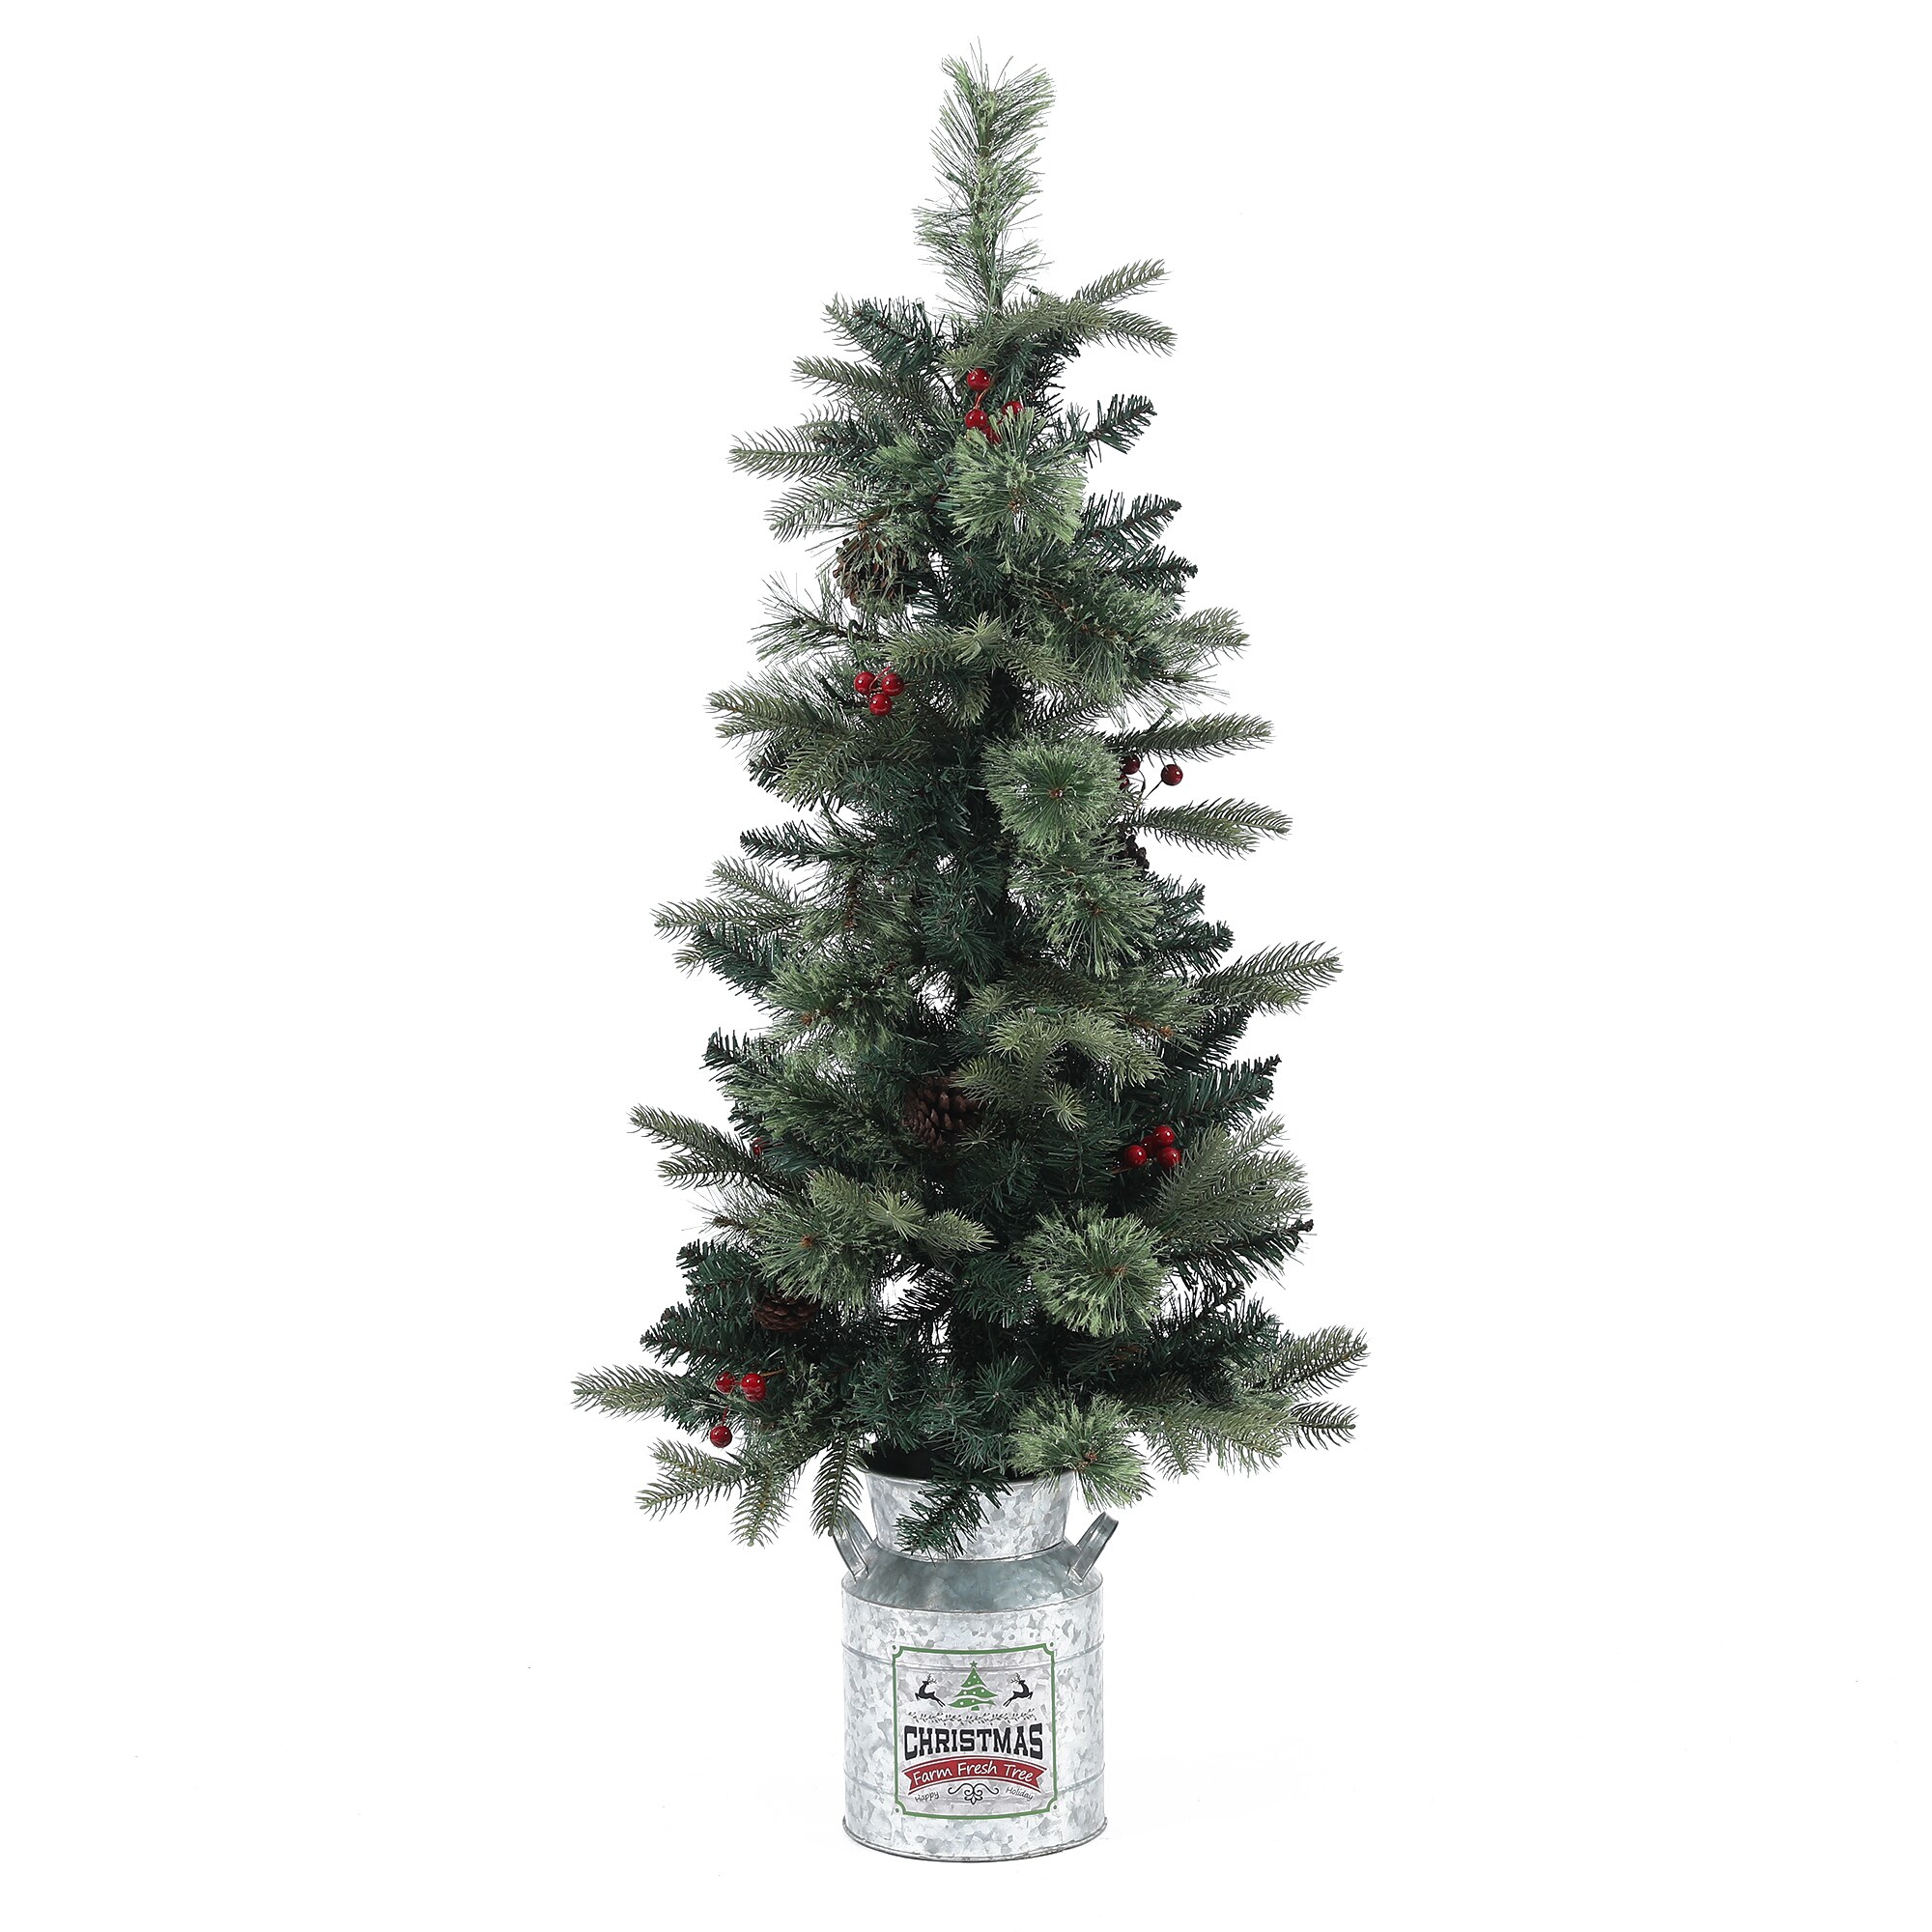 Luxen Home 4-ft Pine Pre-lit Artificial Christmas Tree with LED Lights in the Artificial Christmas Trees department at Lowes.com